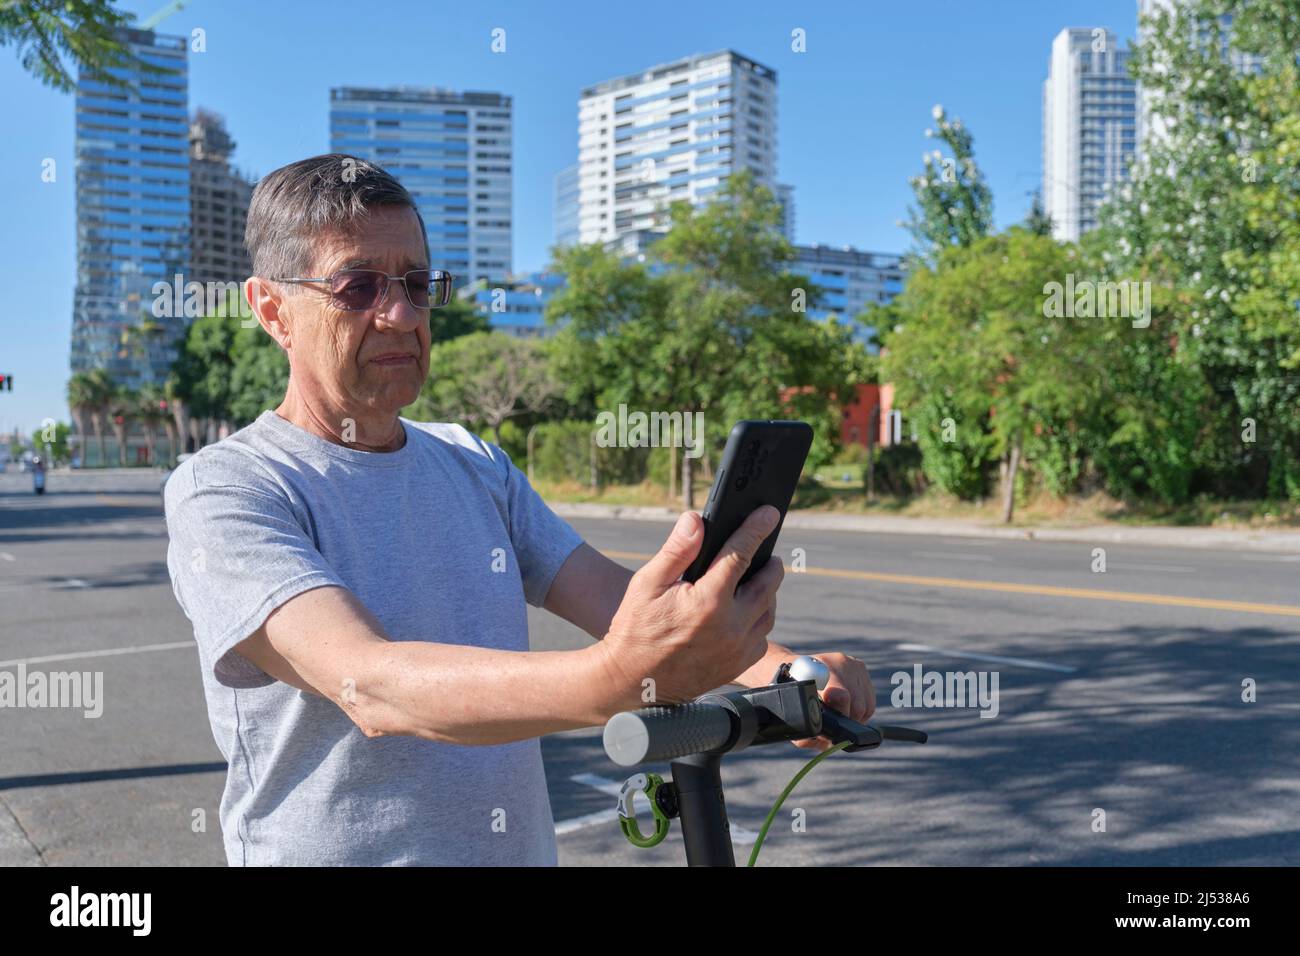 Hispanic senior man looking at his smart phone before riding his electric kick scooter in the city a sunny morning. Concepts of technology, active ret Stock Photo